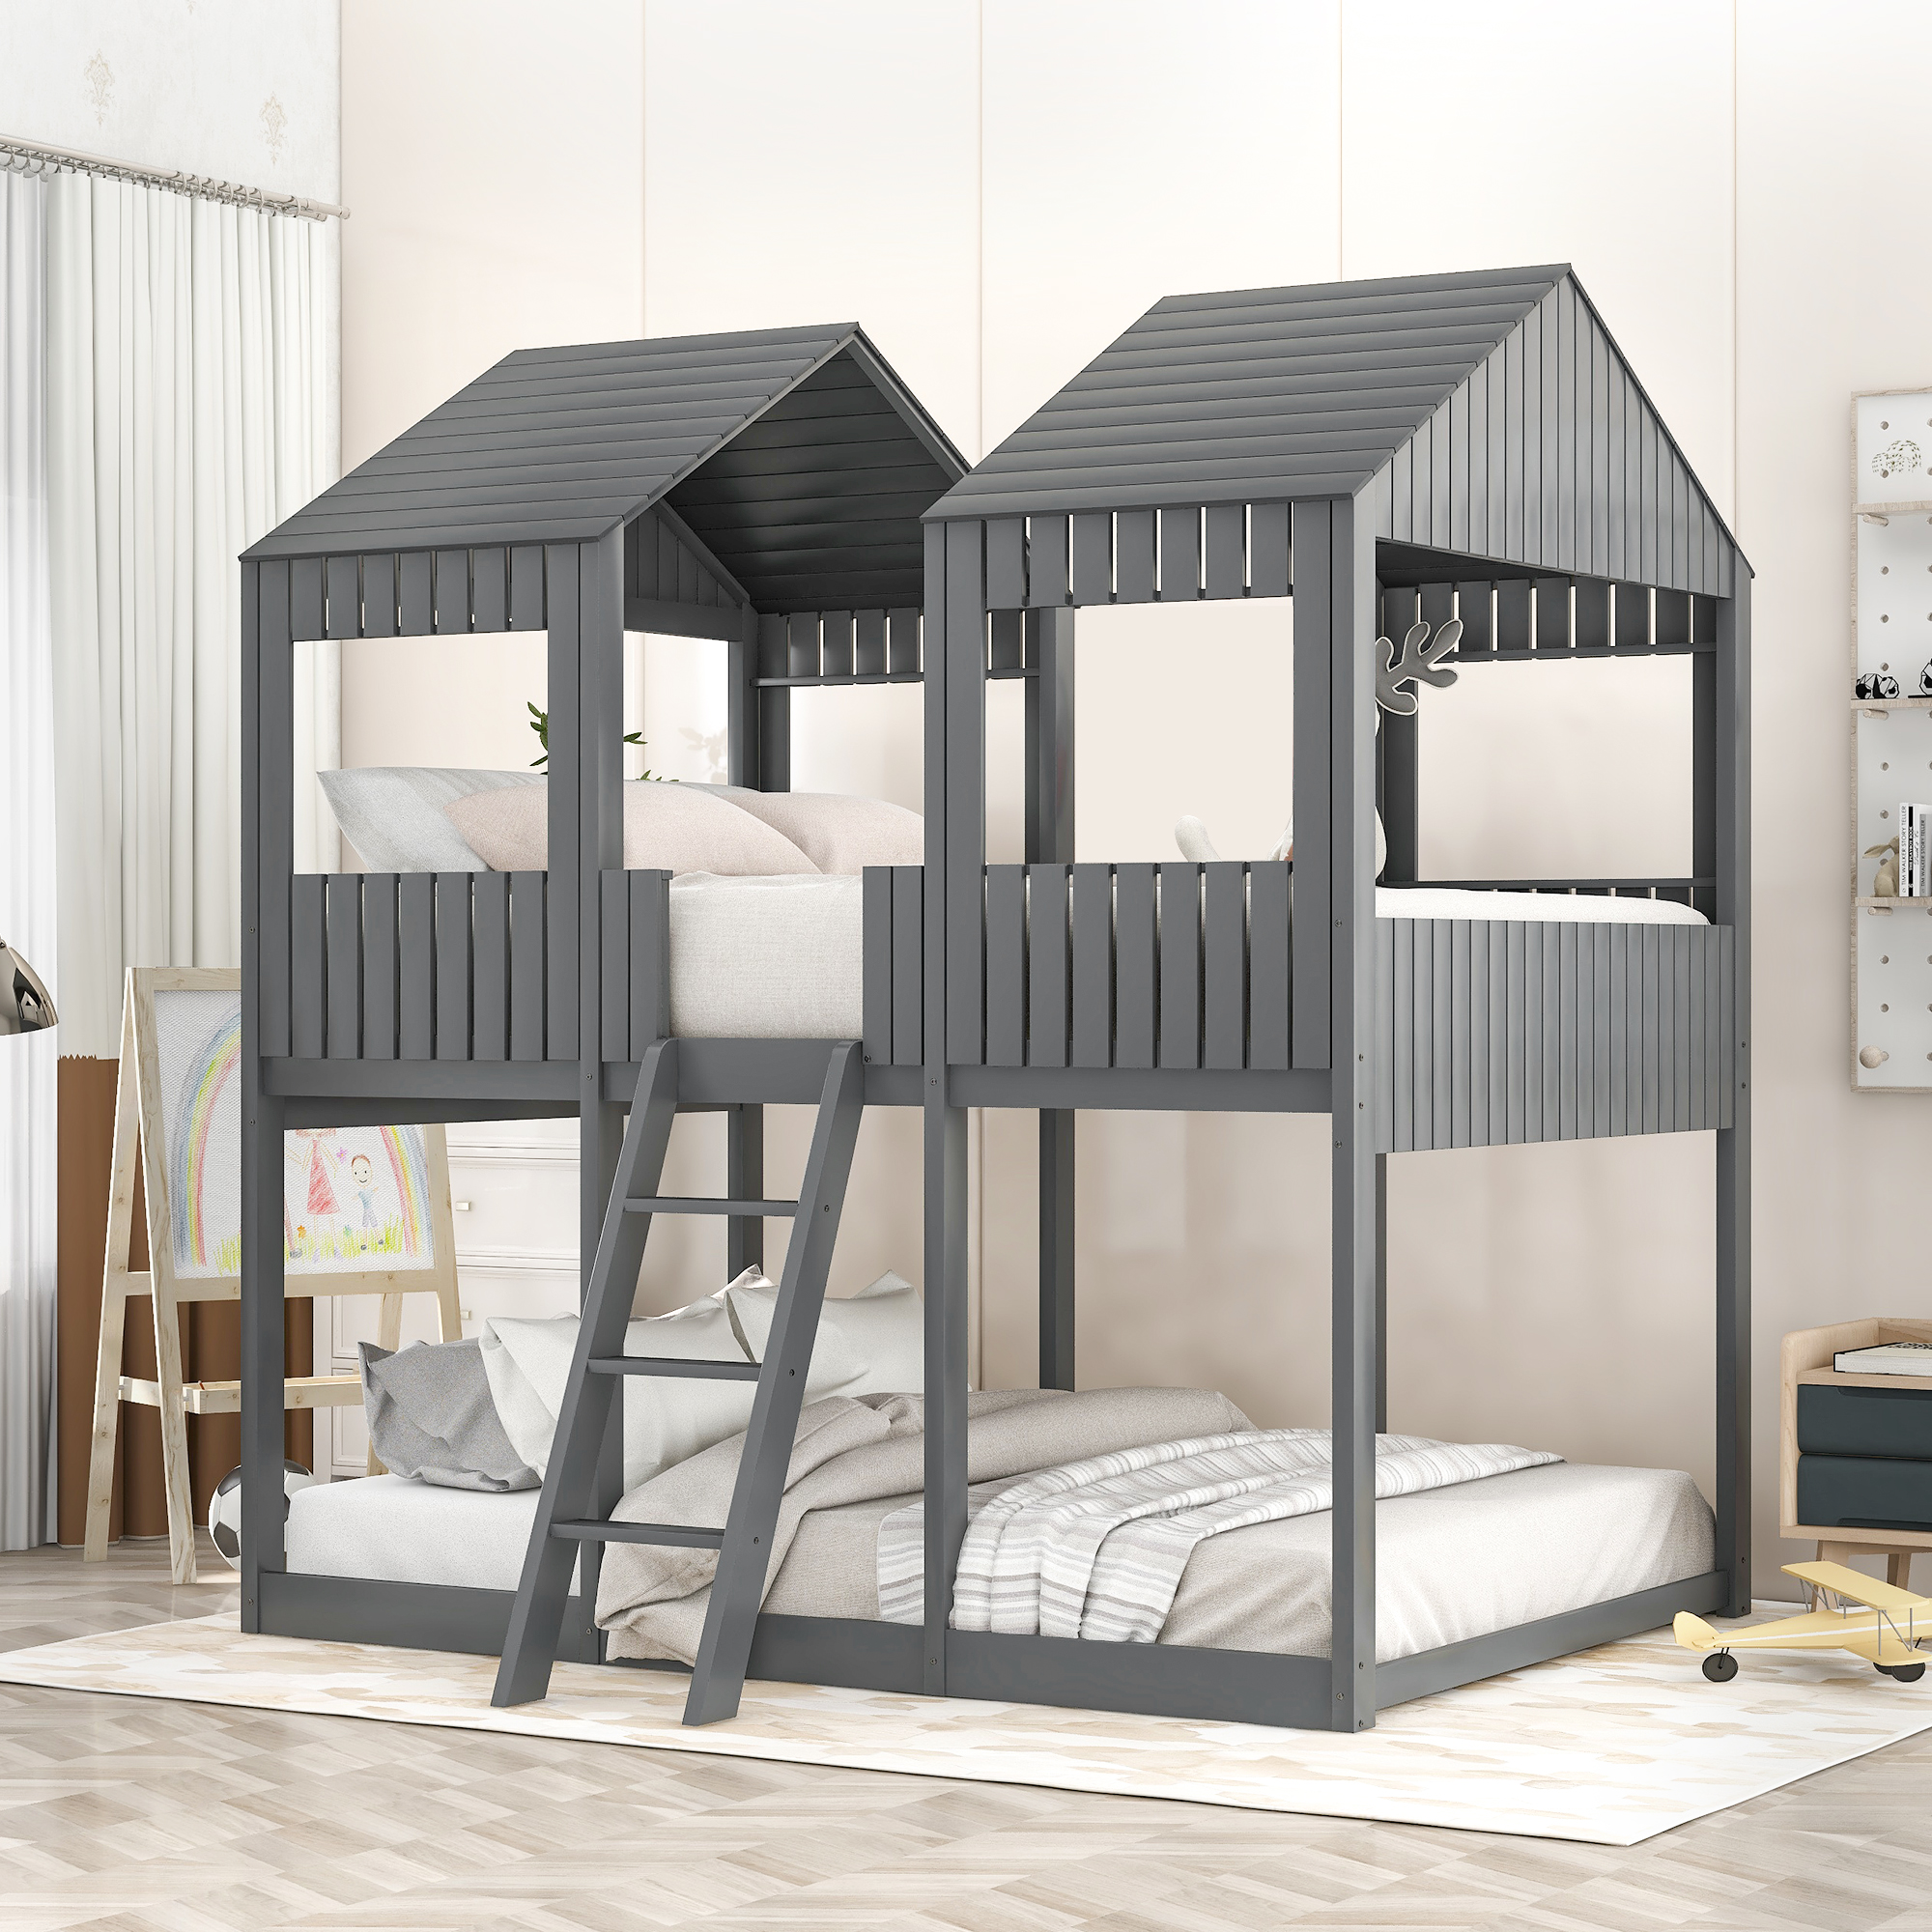 Full Over Full WoodBunk Bed with Roof, Window, Guardrail, Ladder (Gray)-Boyel Living